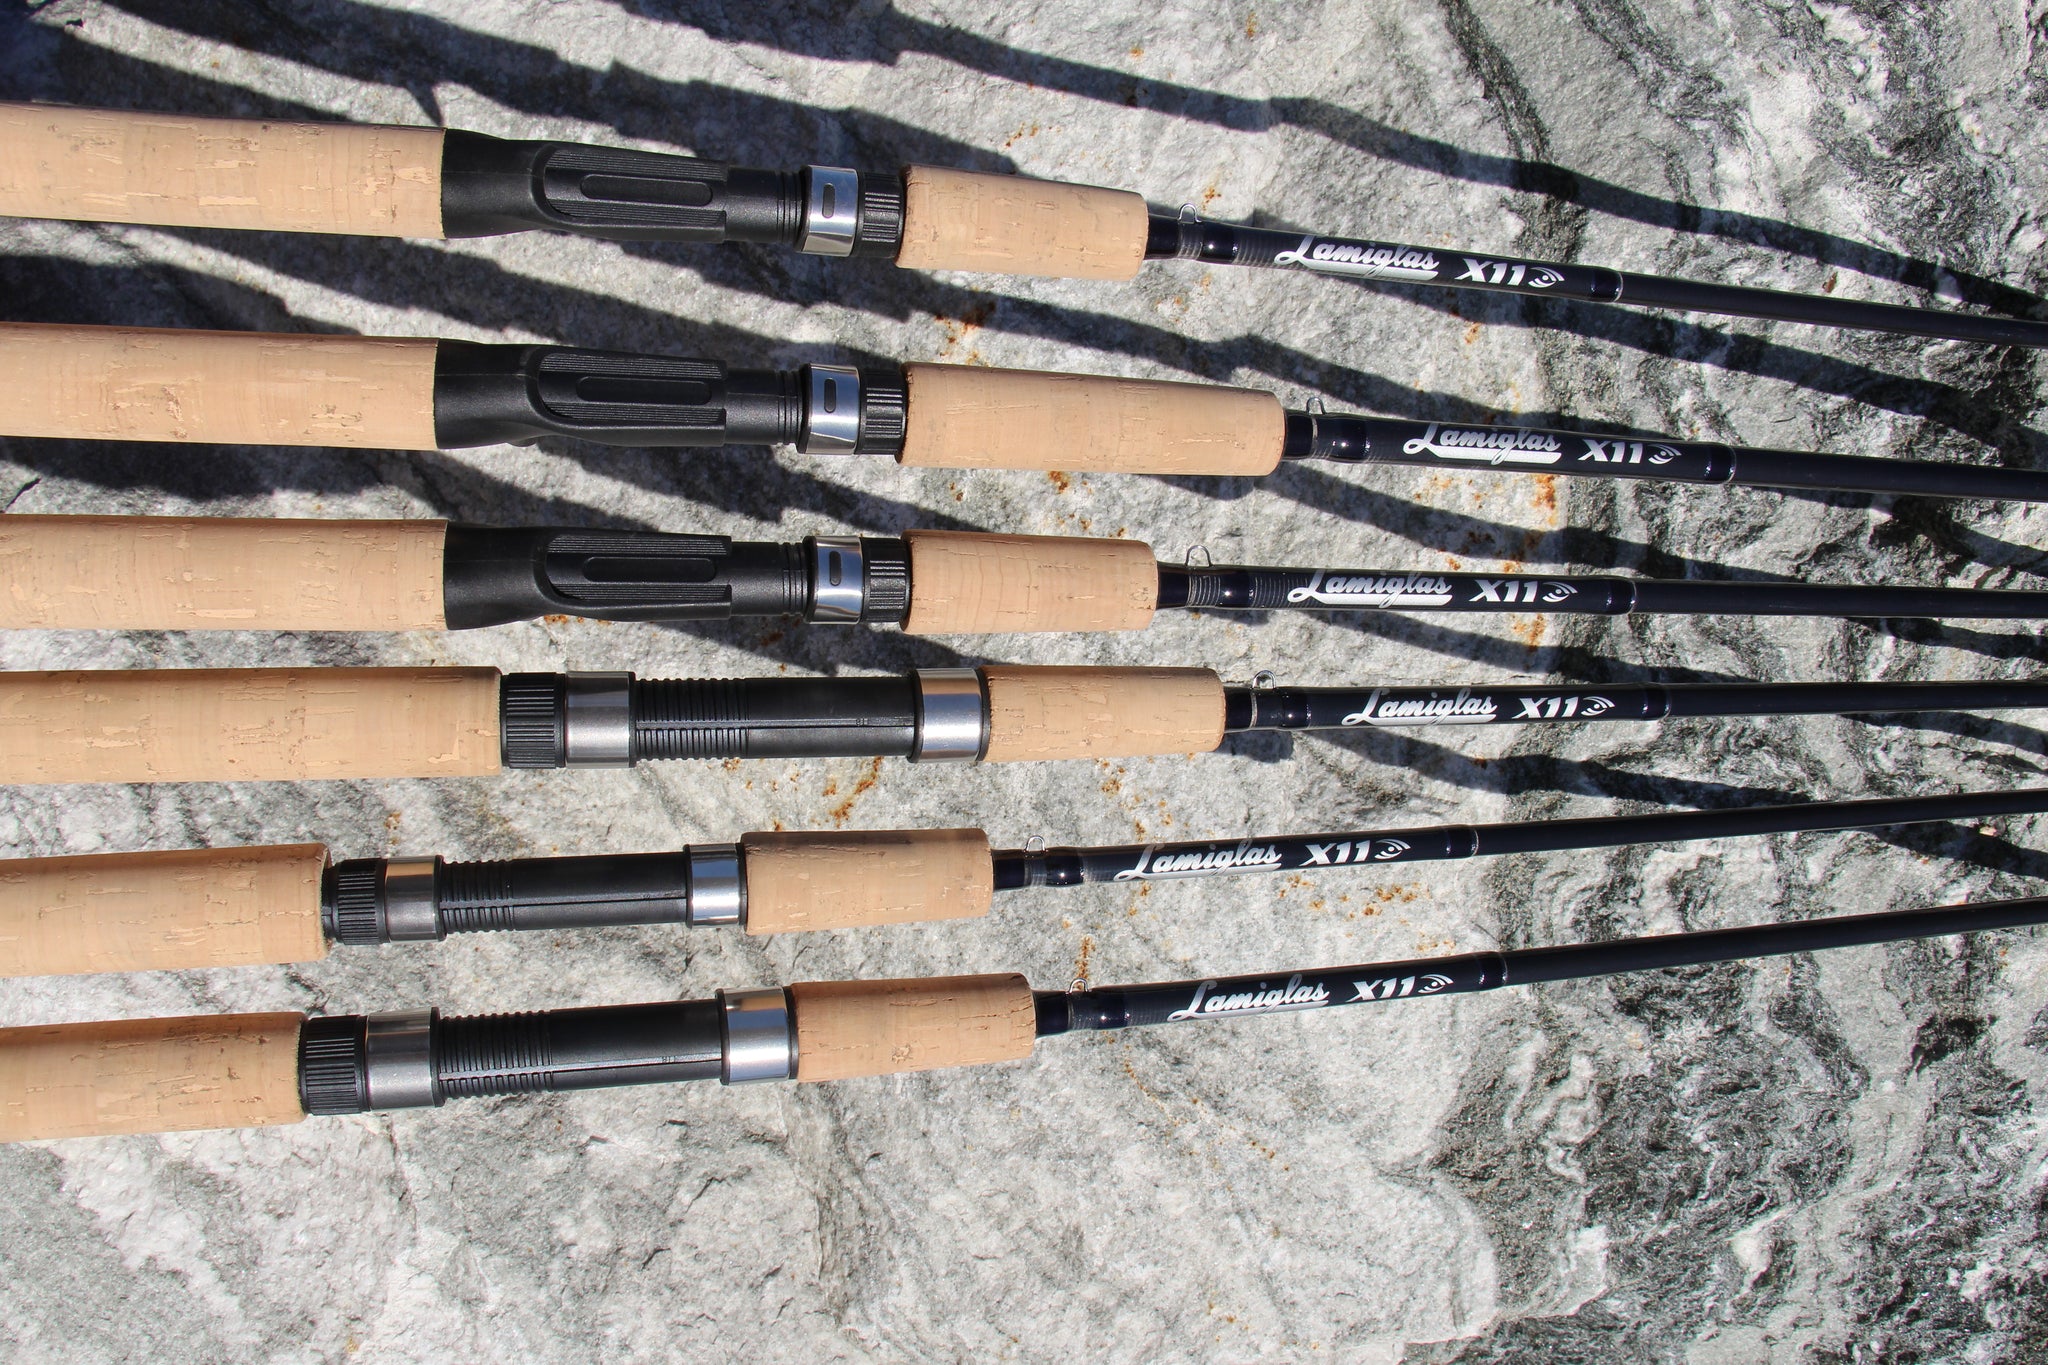 The PERFECT Rod is only $100! Lamiglass X11 Review 